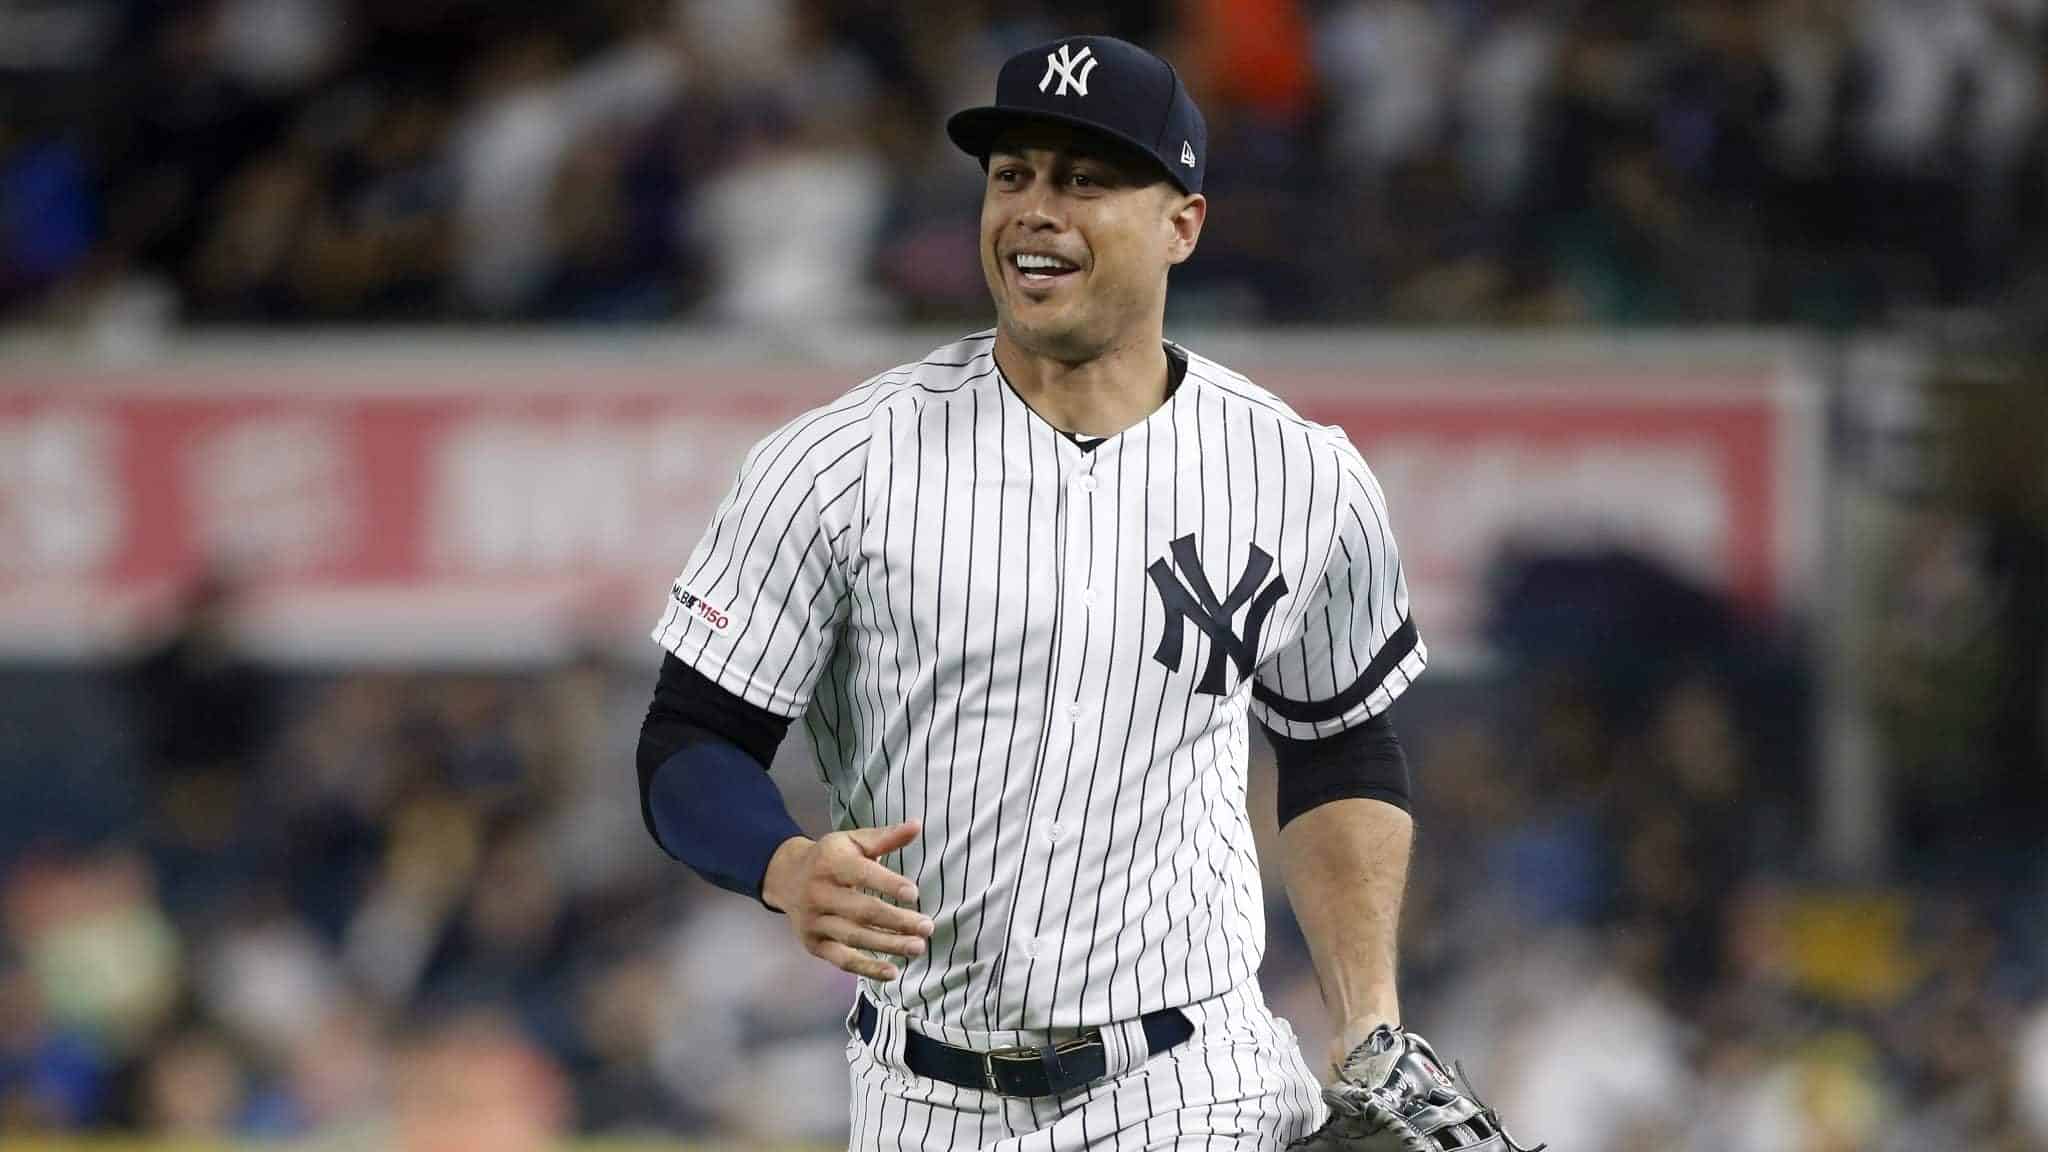 NEW YORK, NEW YORK - JUNE 18: Giancarlo Stanton #27 of the New York Yankees as he runs to the dugout after the first inning against the Tampa Bay Rays at Yankee Stadium on June 18, 2019 in New York City.